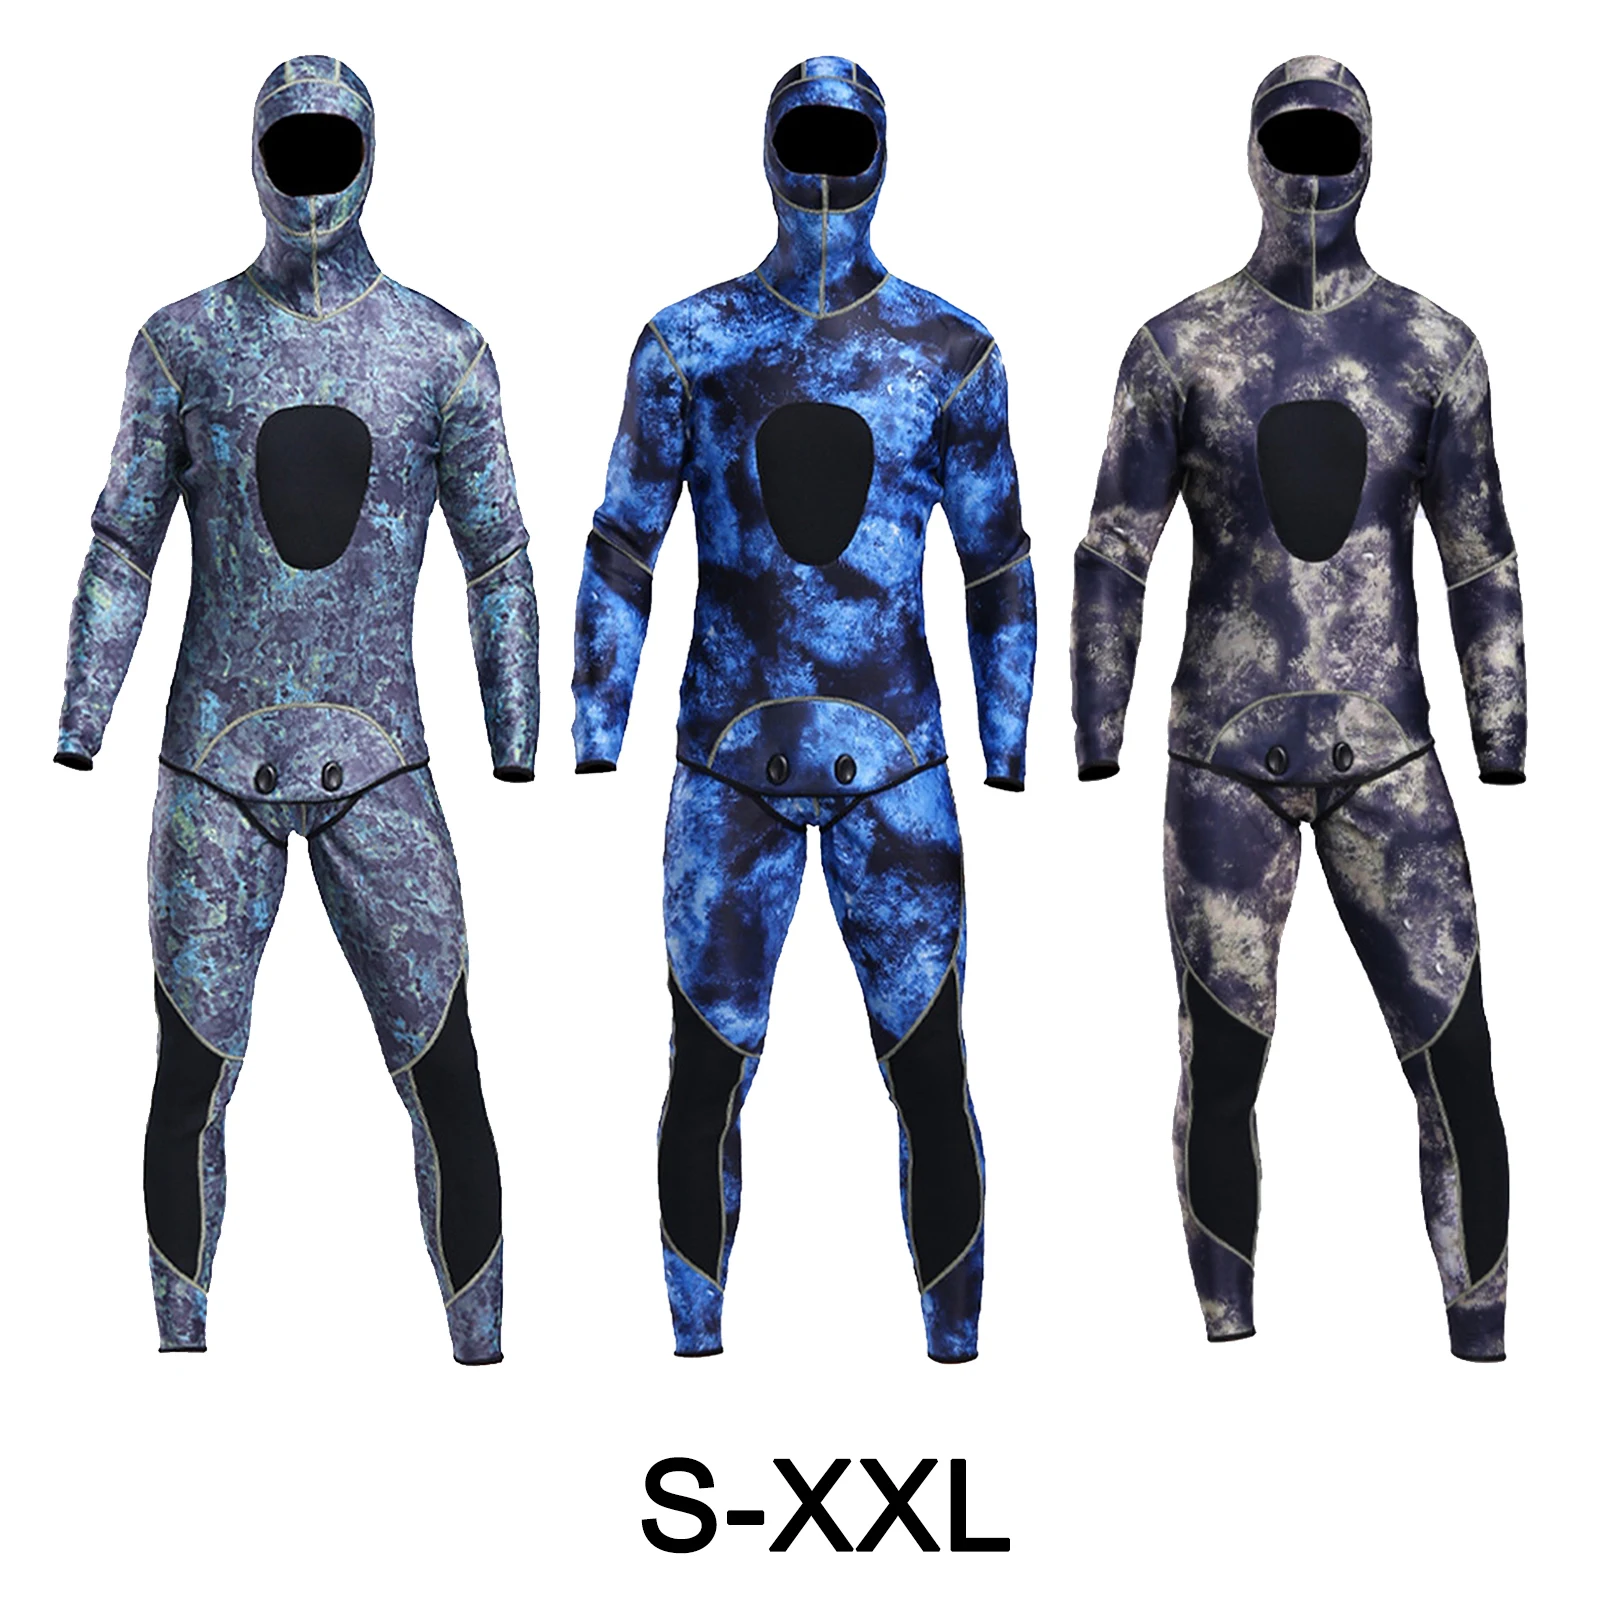 Man Wetsuit All-in-One Twp-piece Diving Wet Suit with Hood Bib Pants Top for Spearfishing Surfing Snorkeling Clothes